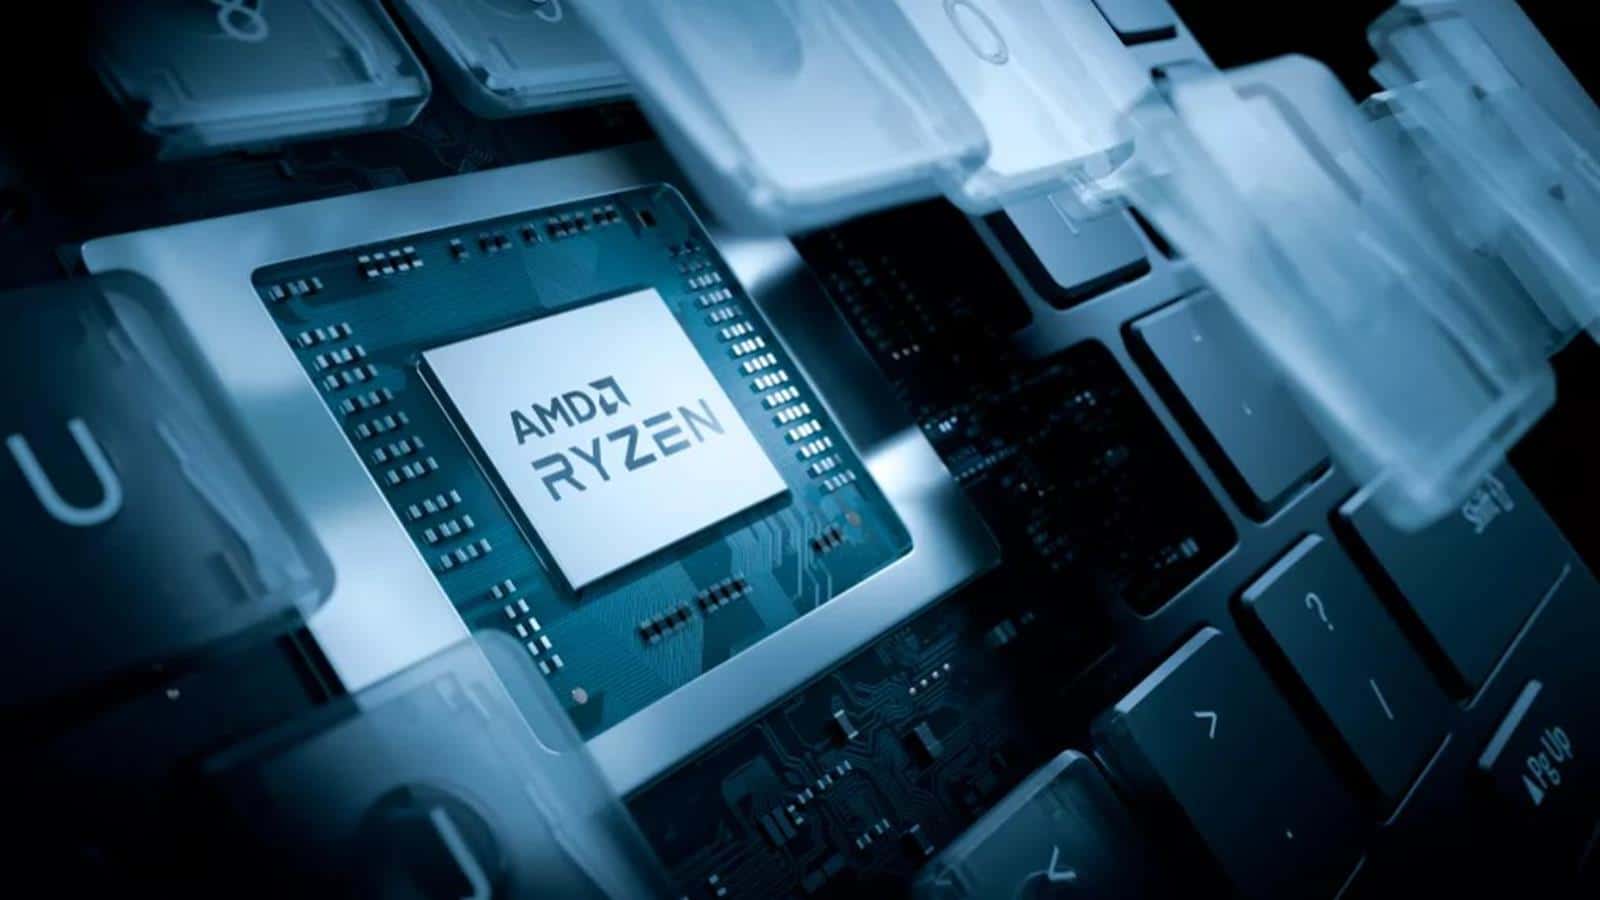 The latest version of Linux will appeal to the owners of the Ryzen APU